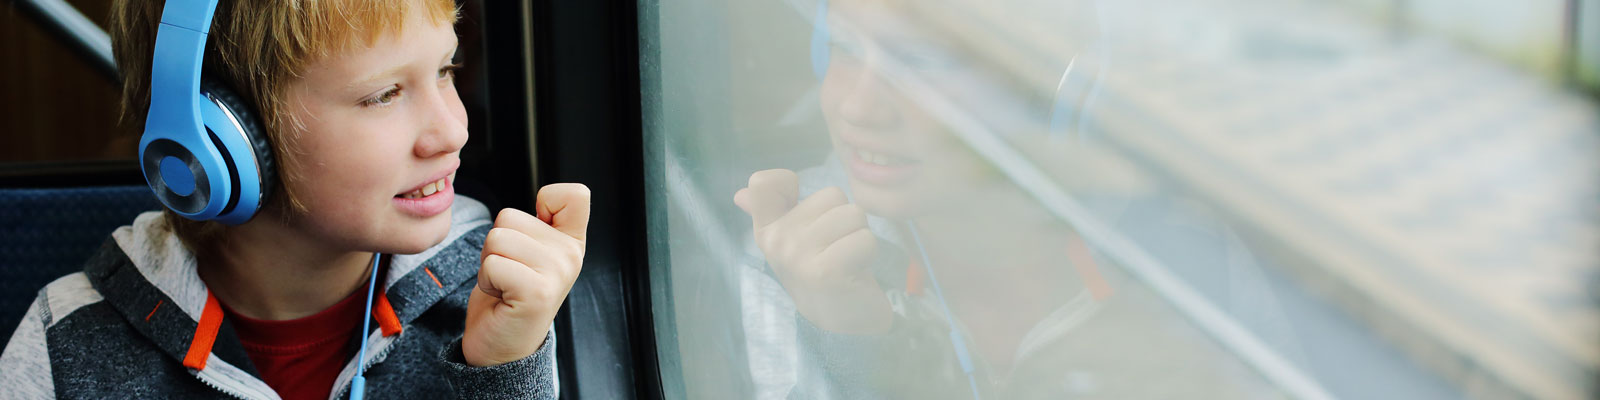 Autism - ASD - Autistic Child with headphones on train - Communicating Above Barriers